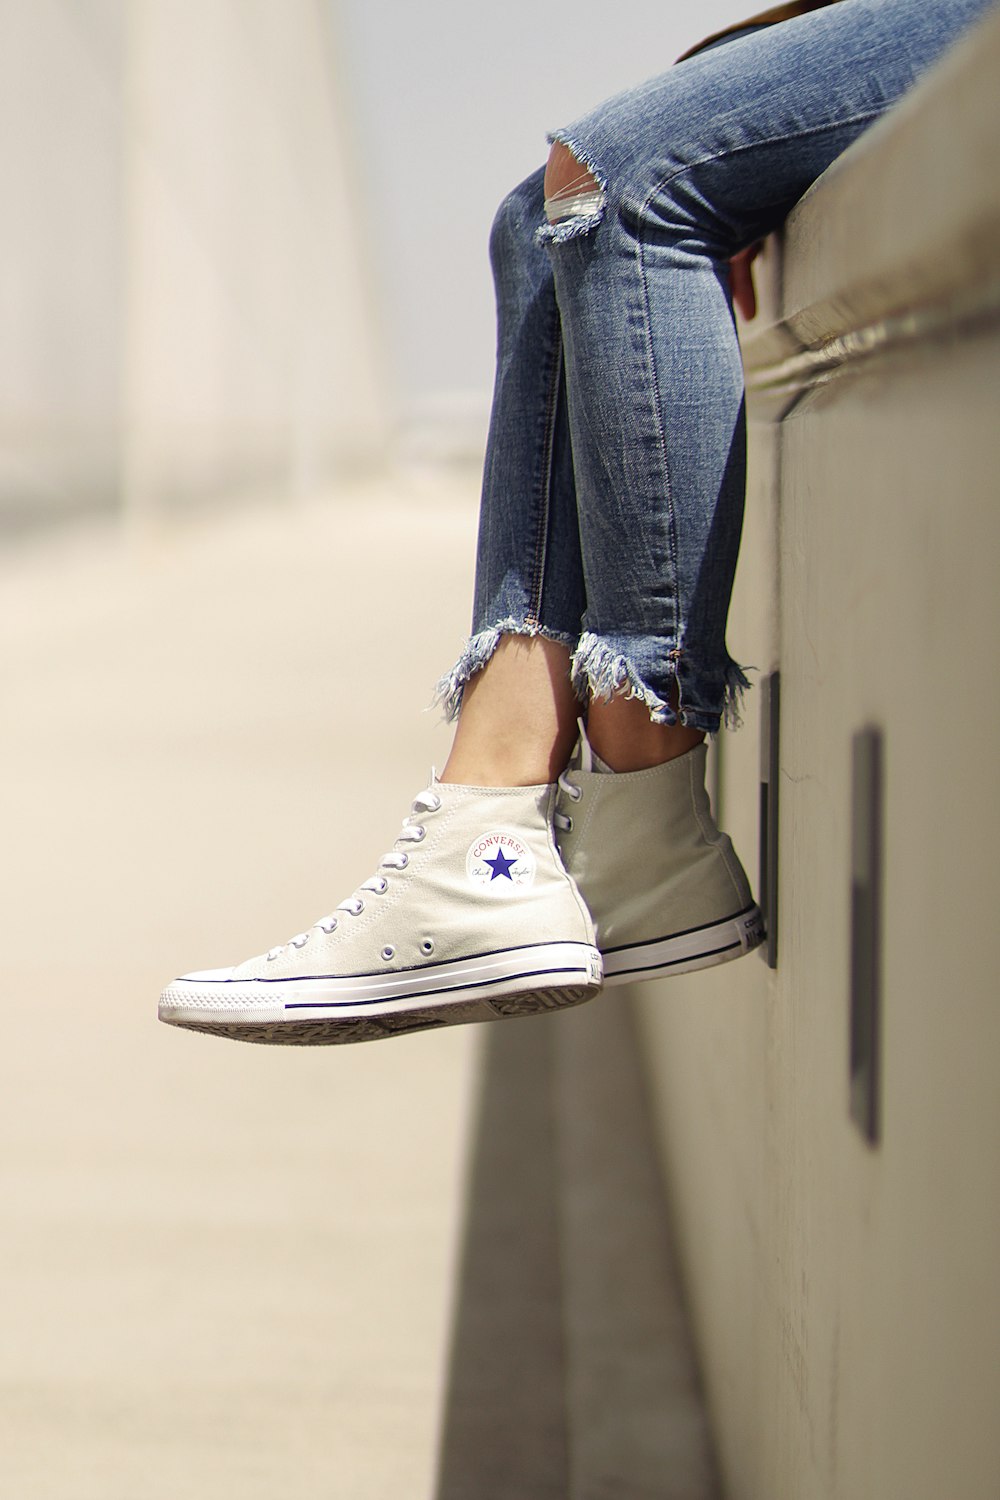 woman wearing white Converse low-top sneakers photo – Free Image on Unsplash